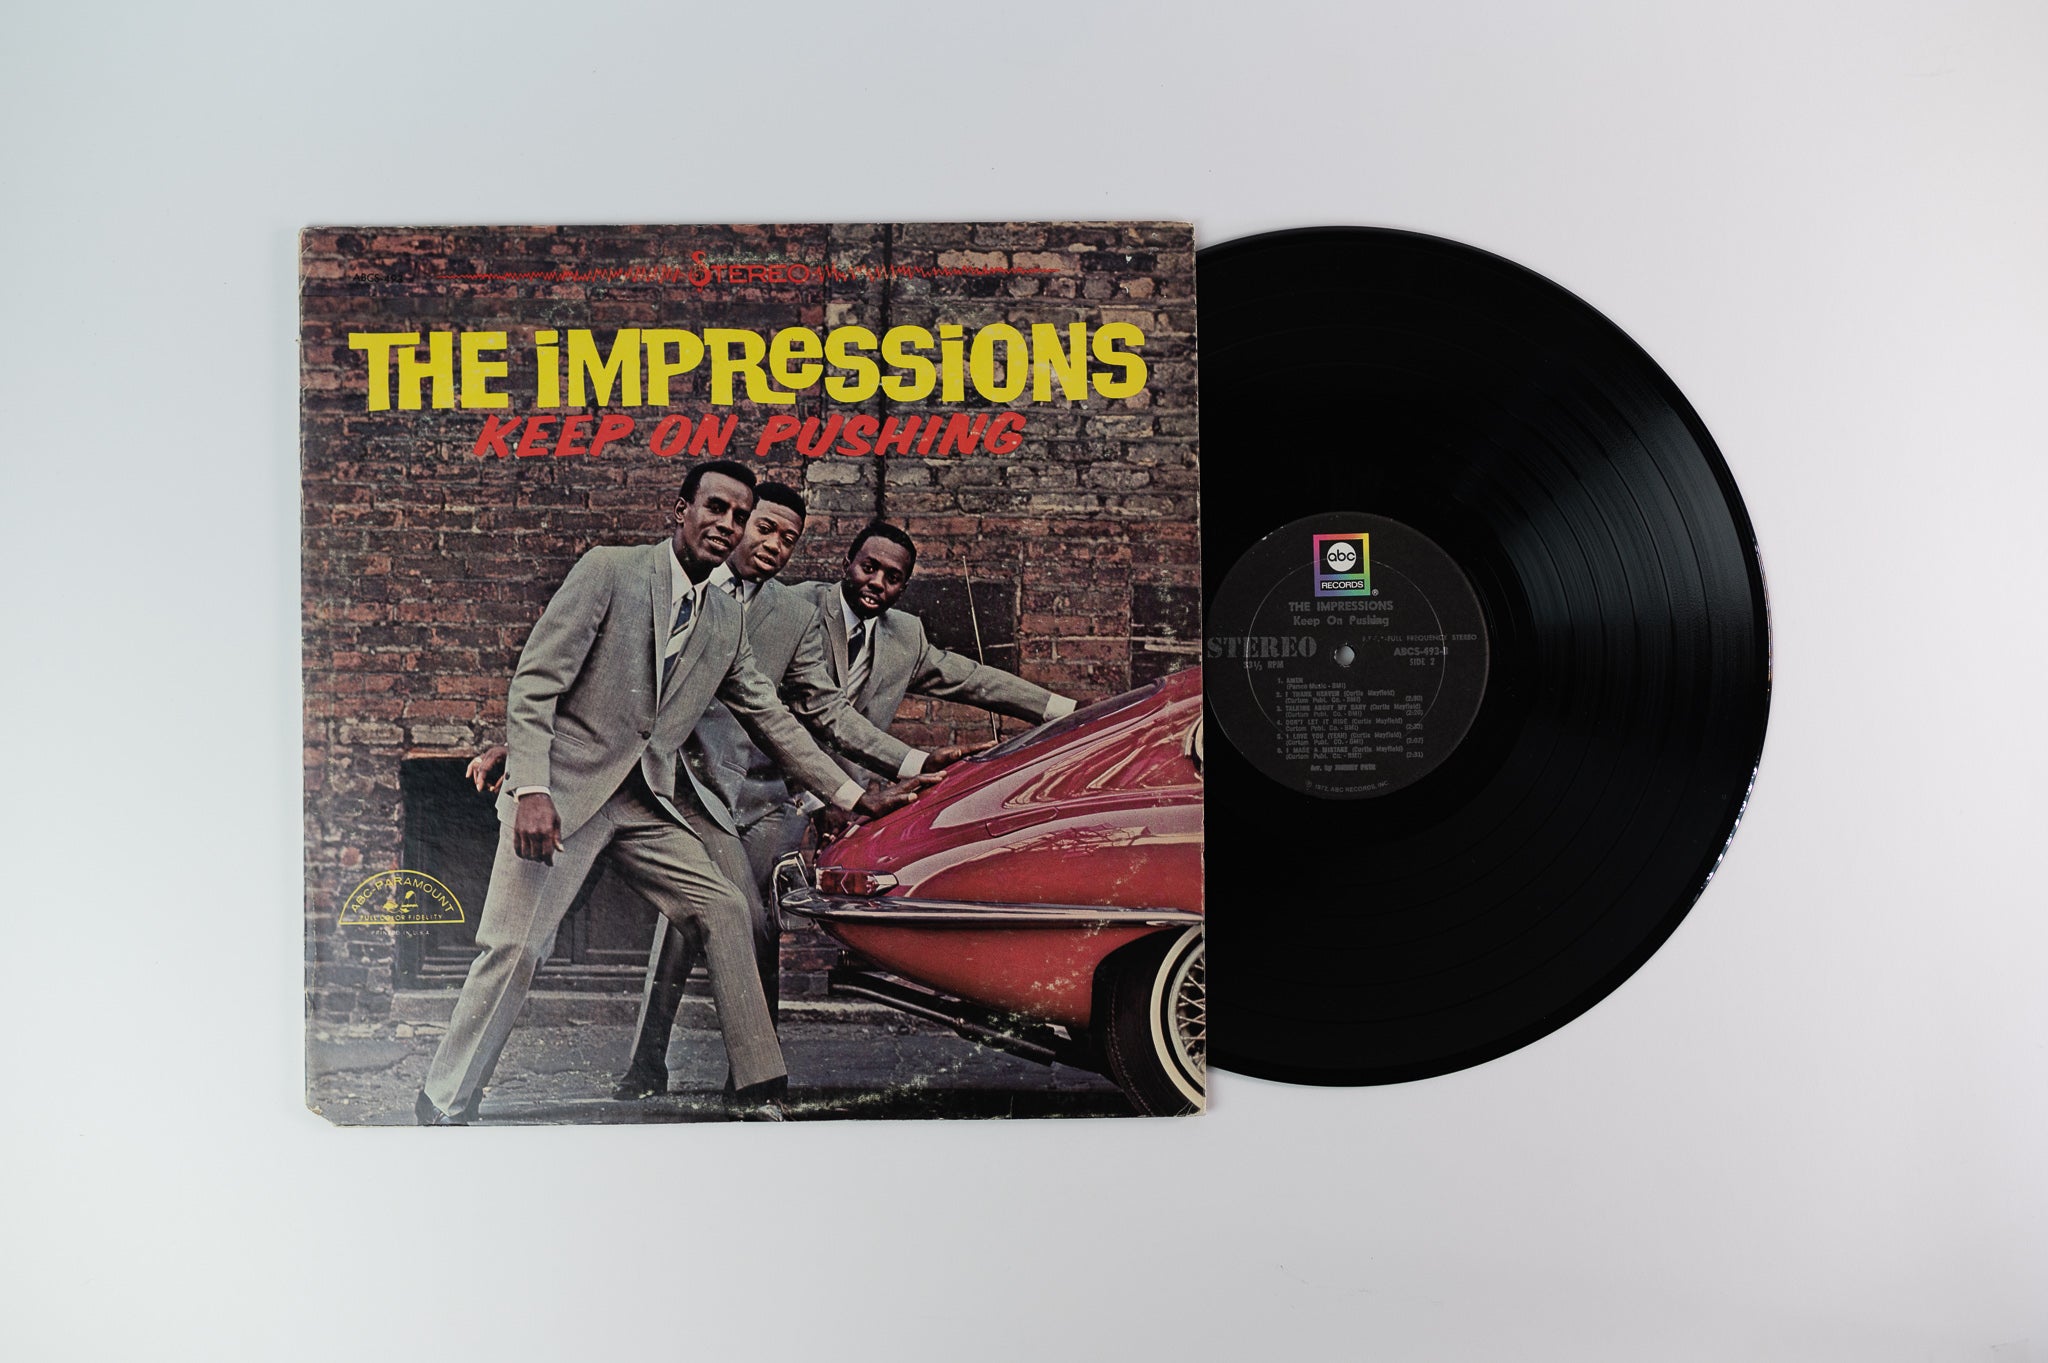 The Impressions - Keep On Pushing on ABC Reissue